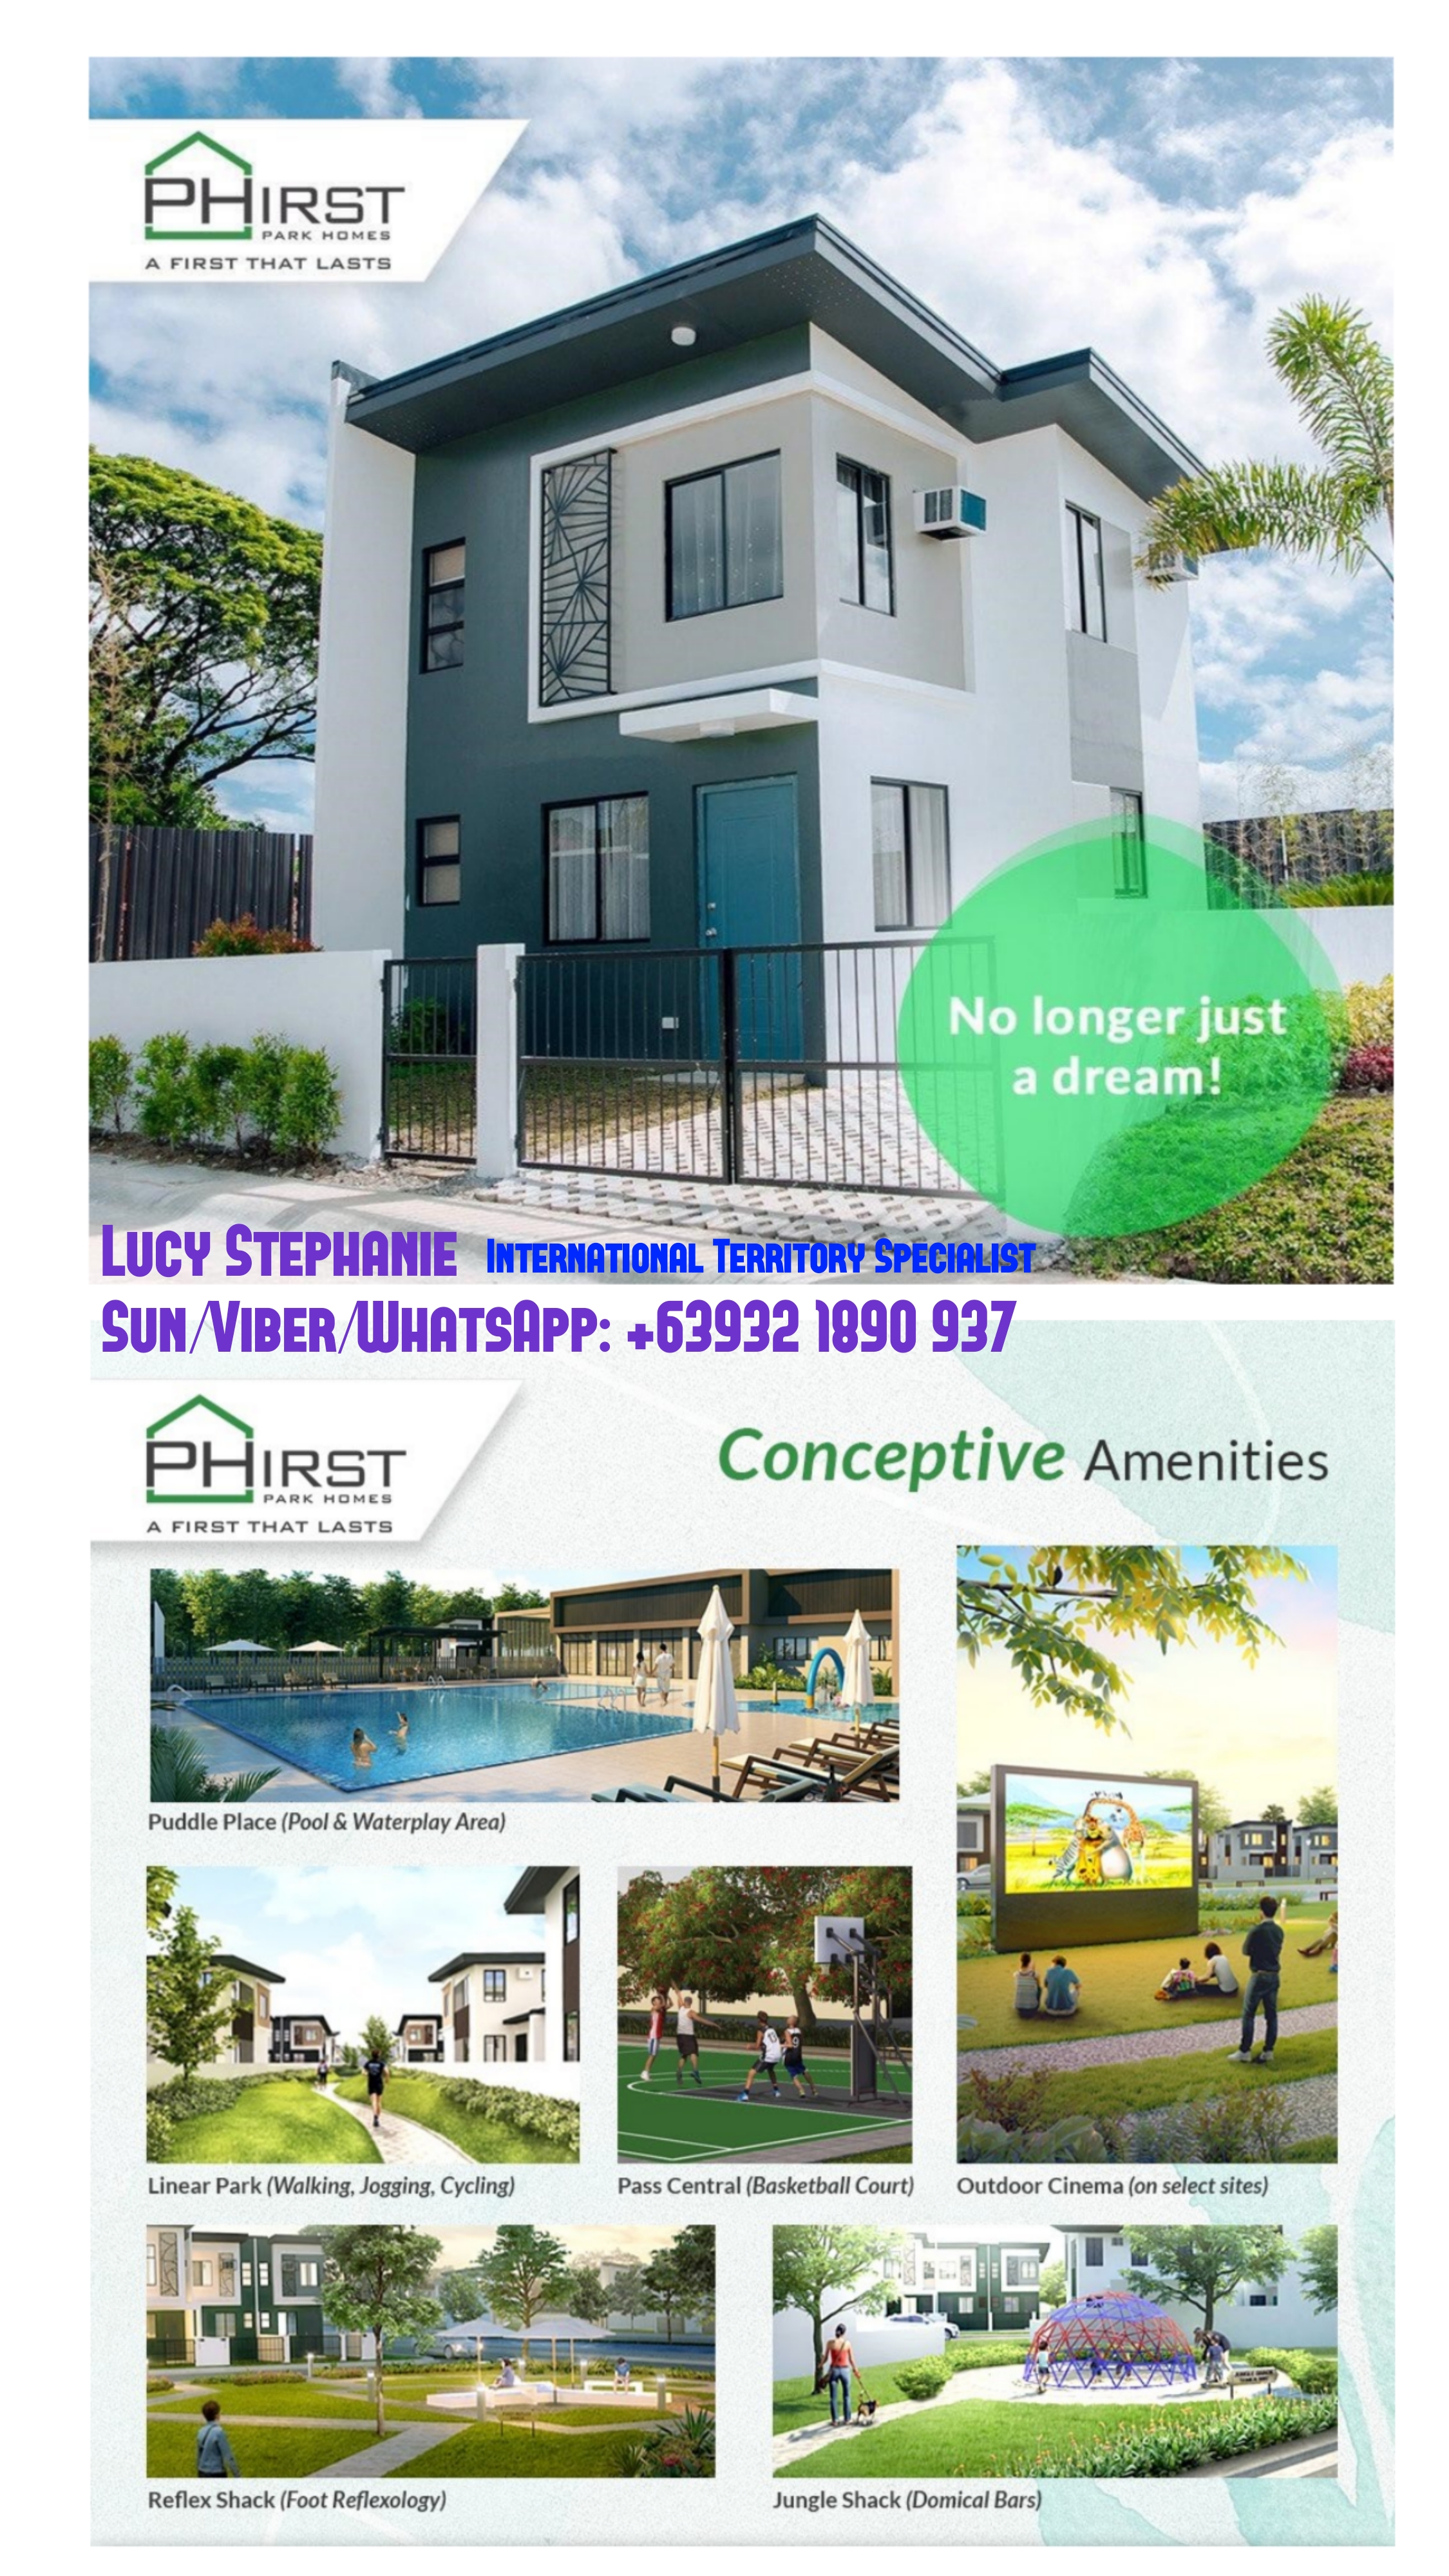 @artgirl/dream-homes-in-calabarzon-and